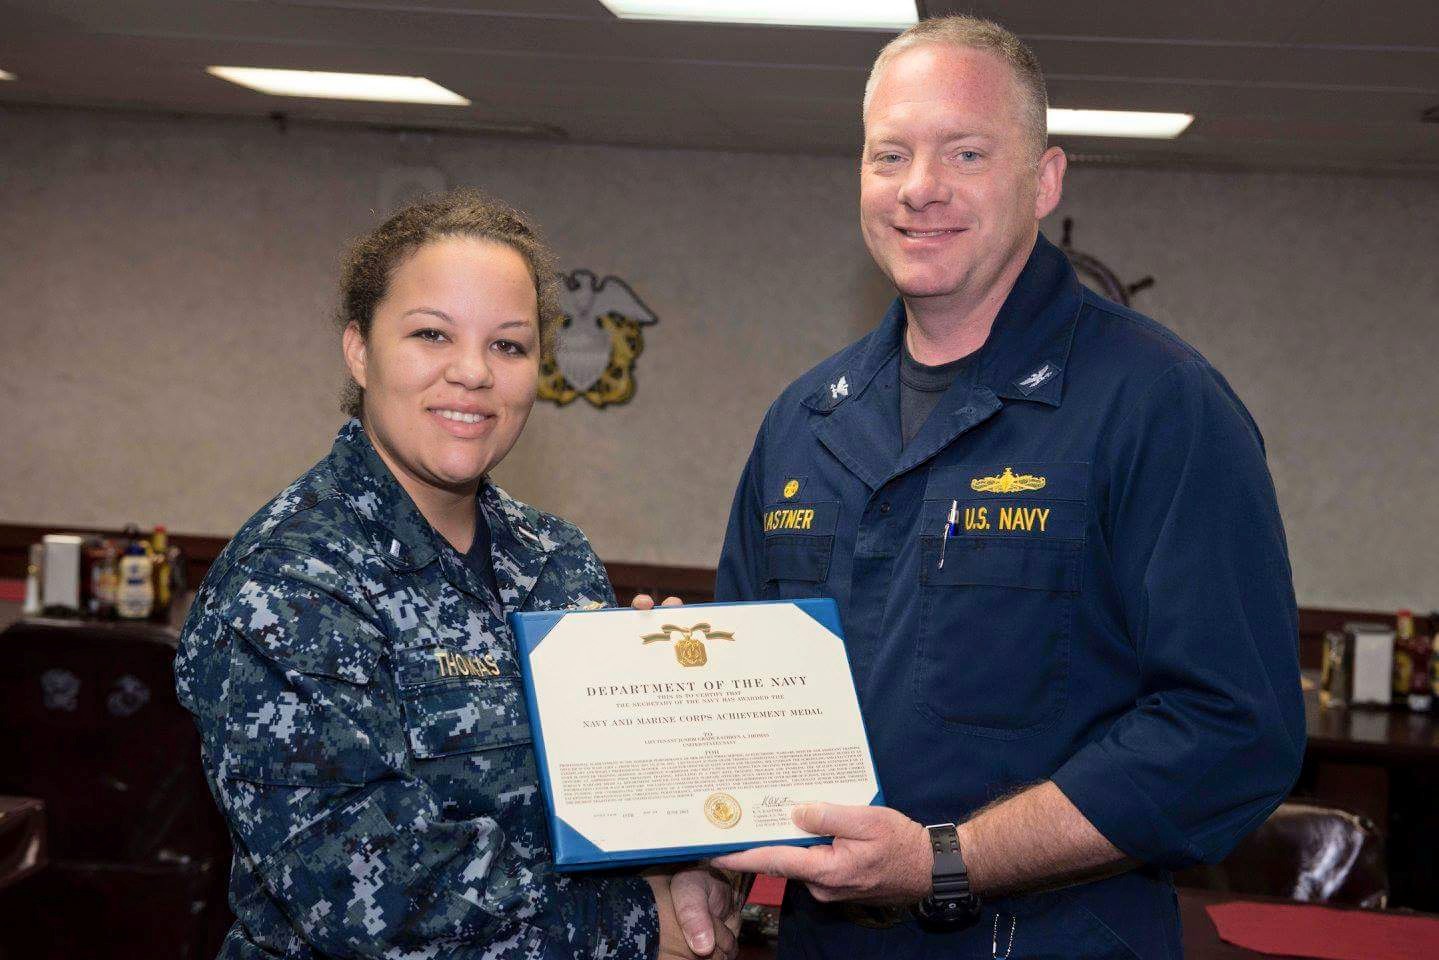 Kathryn is on the fast track to a high ranking position in the United States Navy.